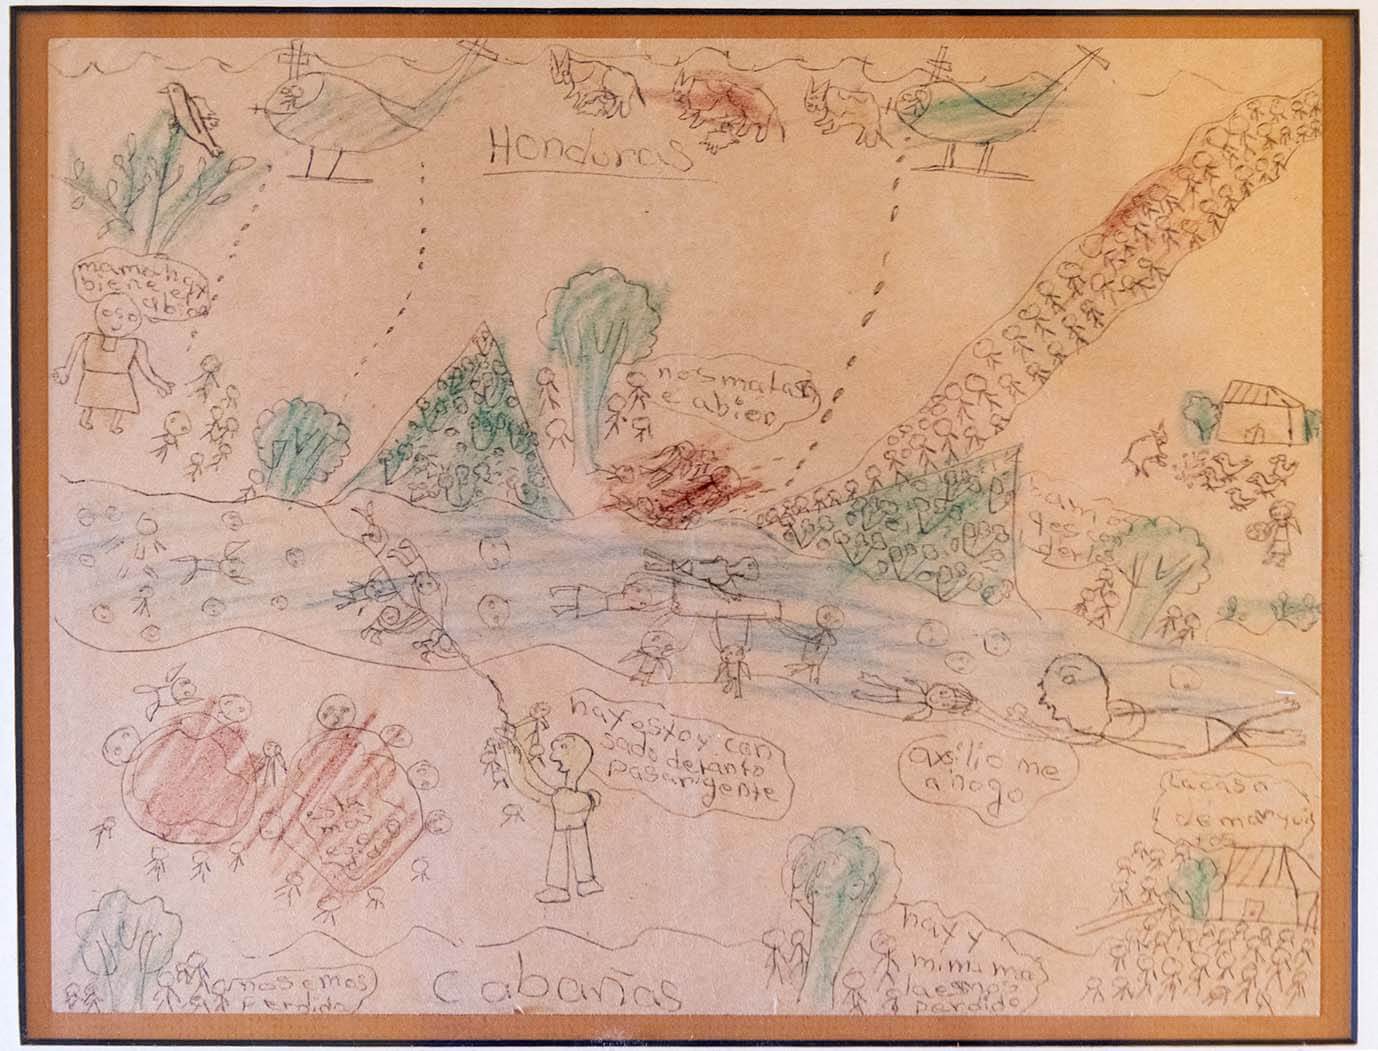 Drawing by a child depicting violence in Honduras.